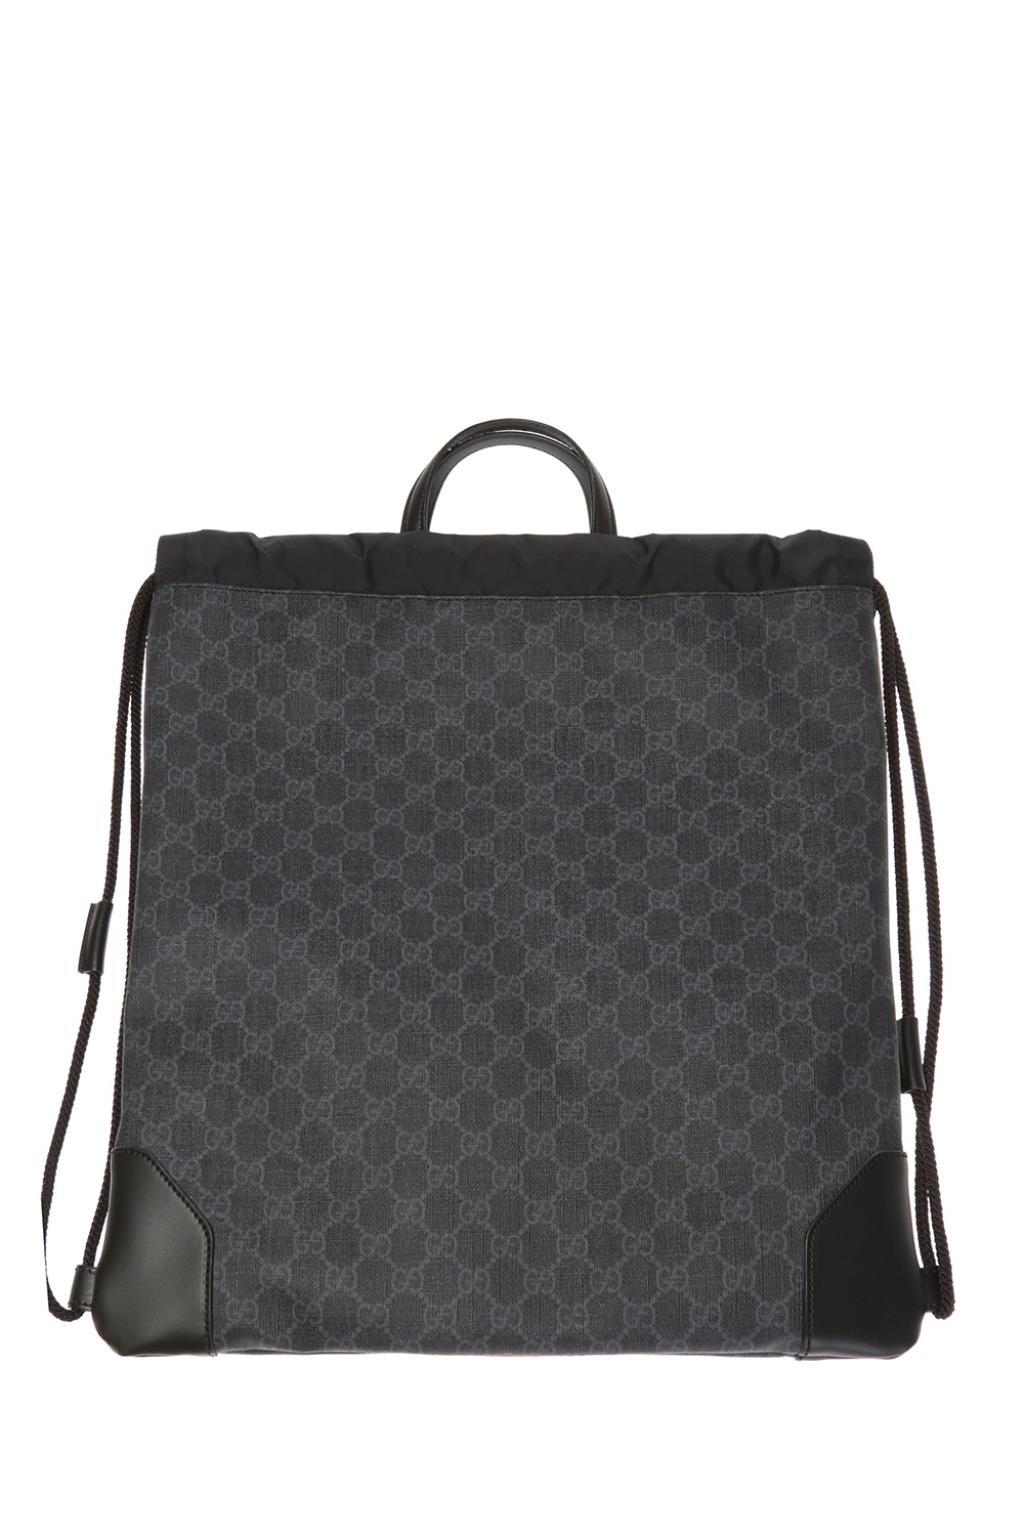 Gucci Leather Soft GG Supreme Drawstring Backpack in Black for Men - Lyst